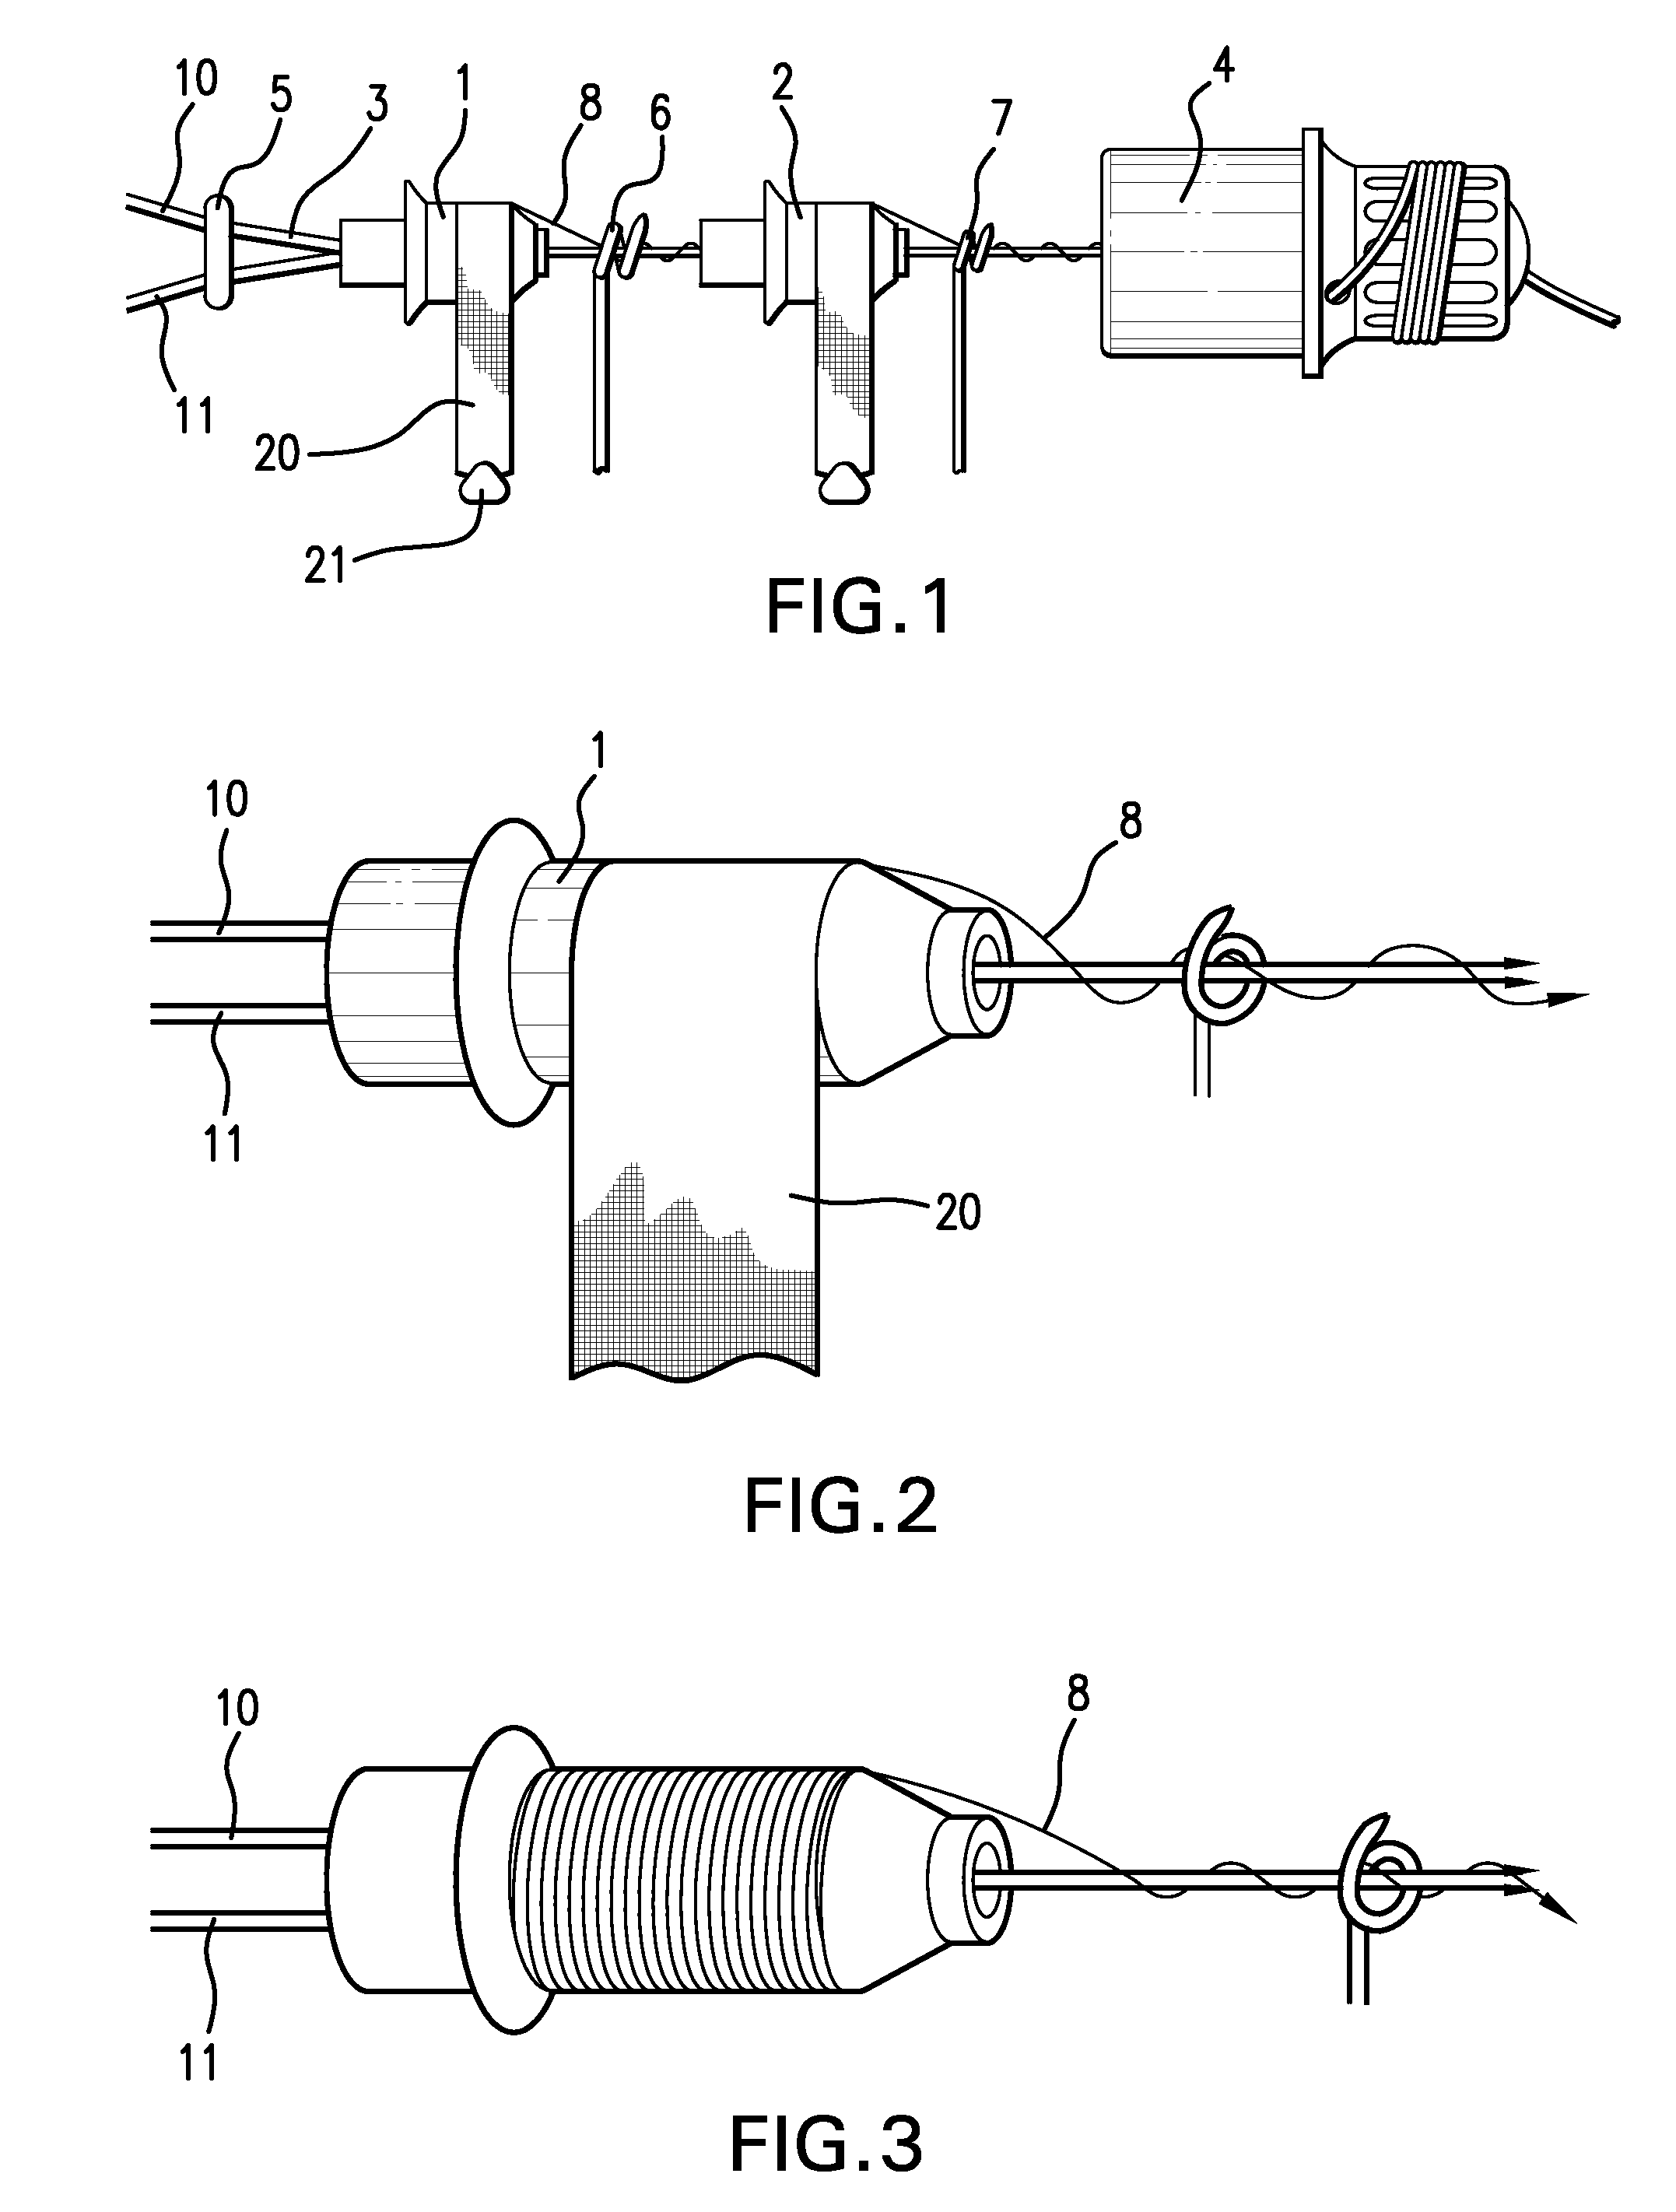 Automatic lacer for bundles of polymeric fiber